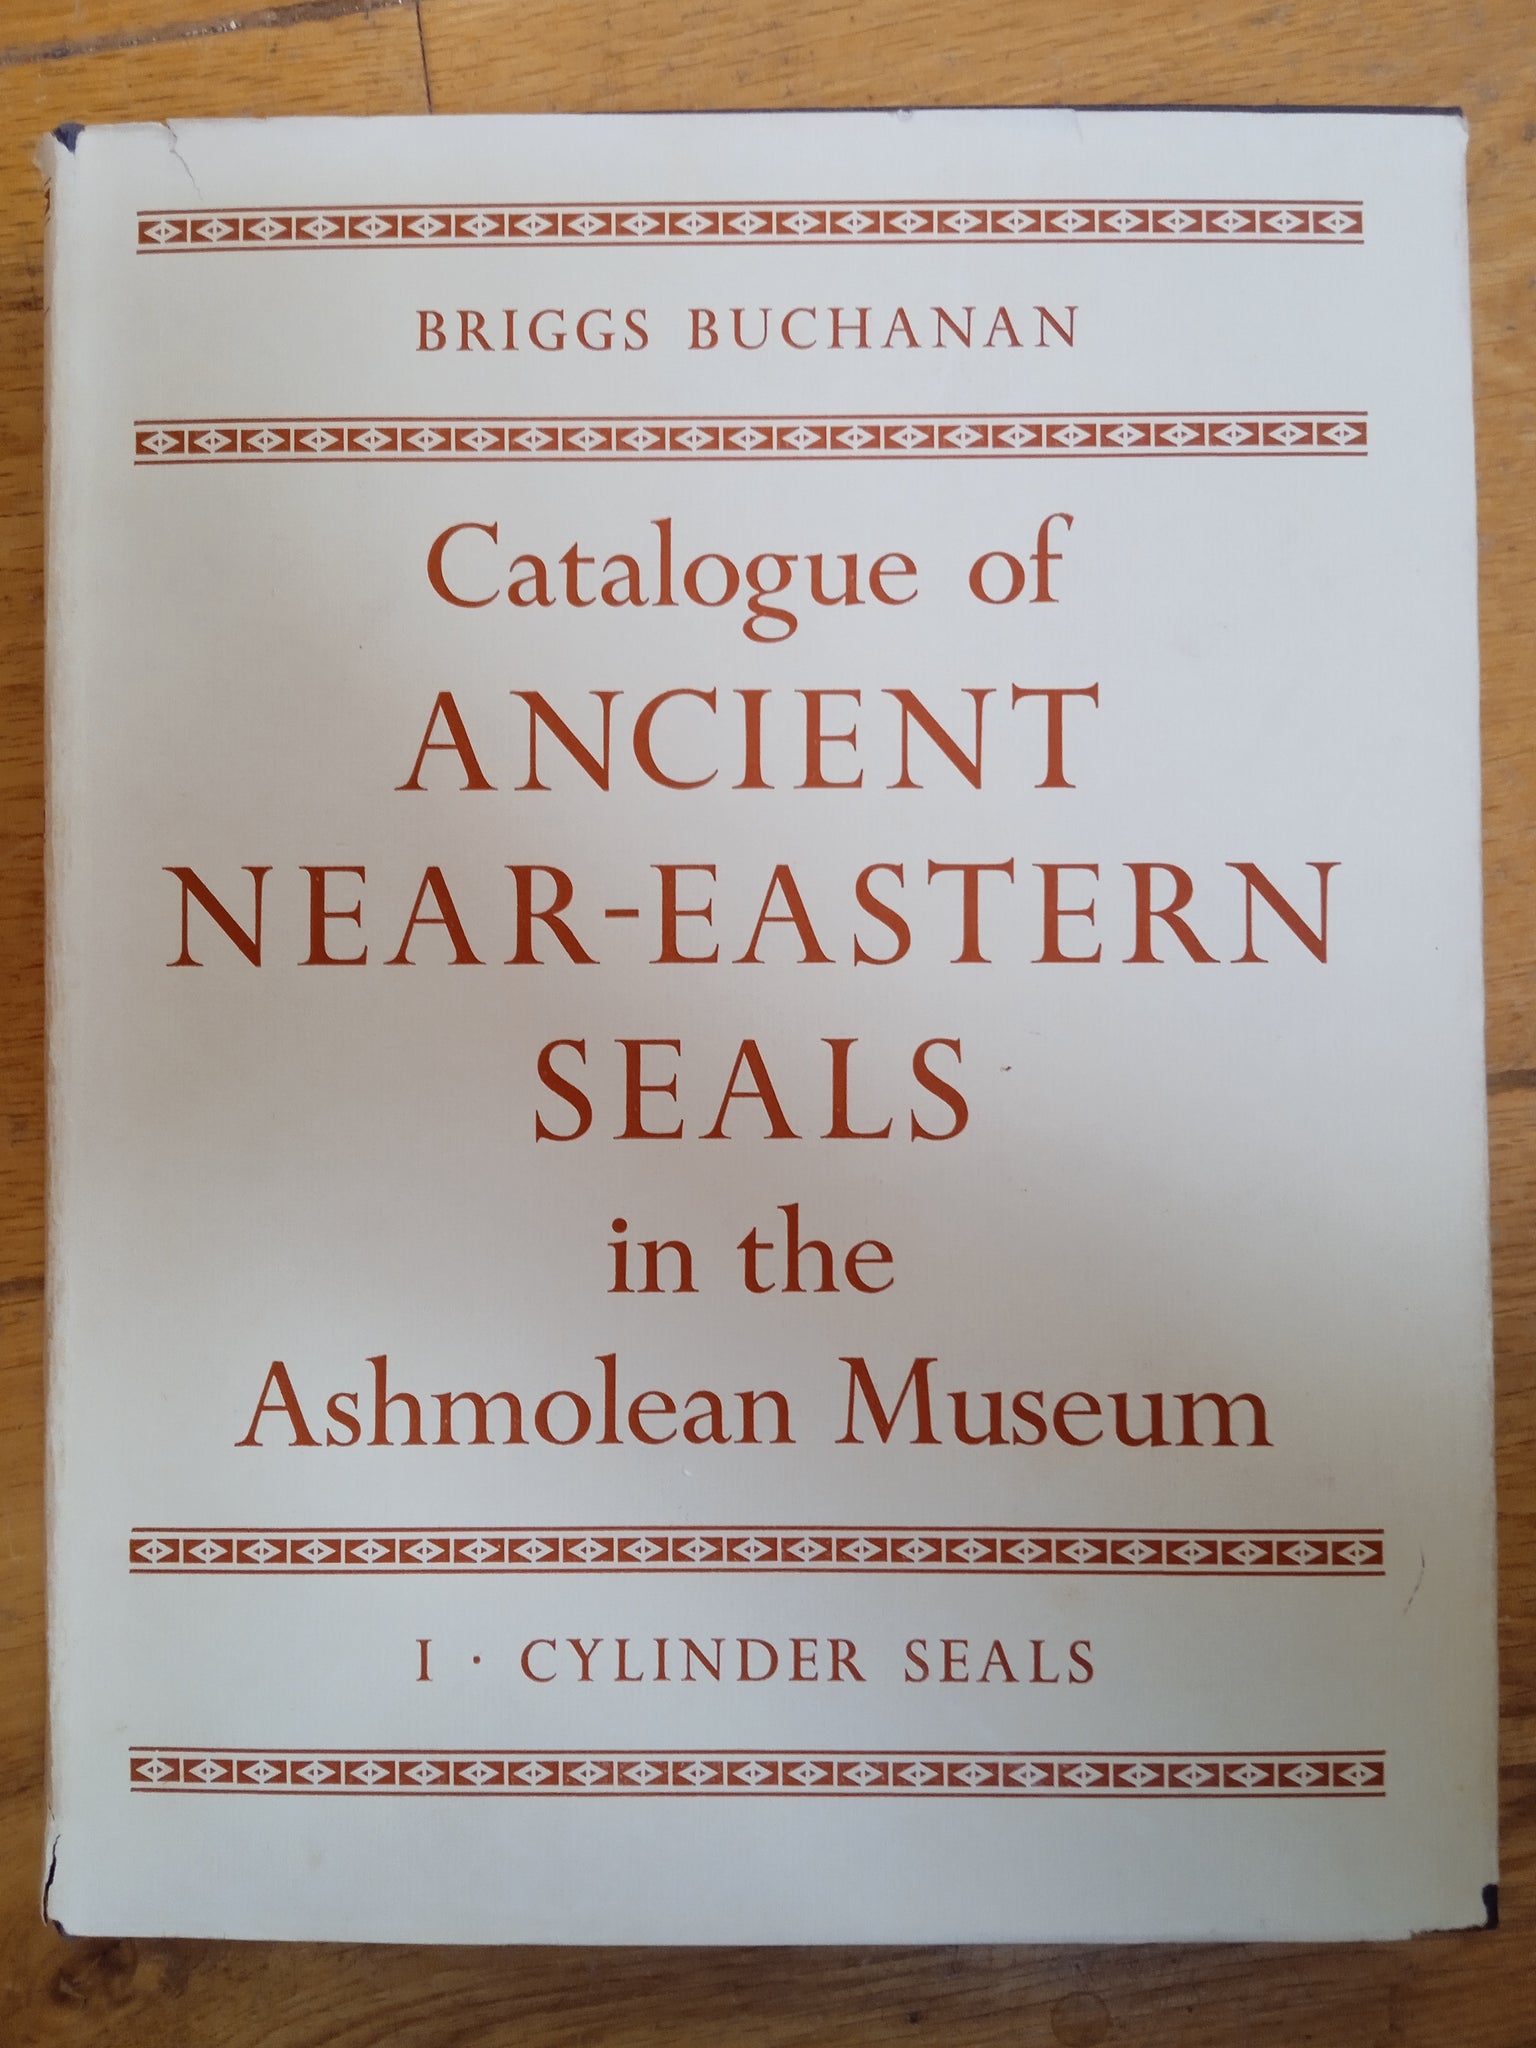 Catalogue of Ancient Near-Eastern Seals in the Ashmolean Museum volume I et II.